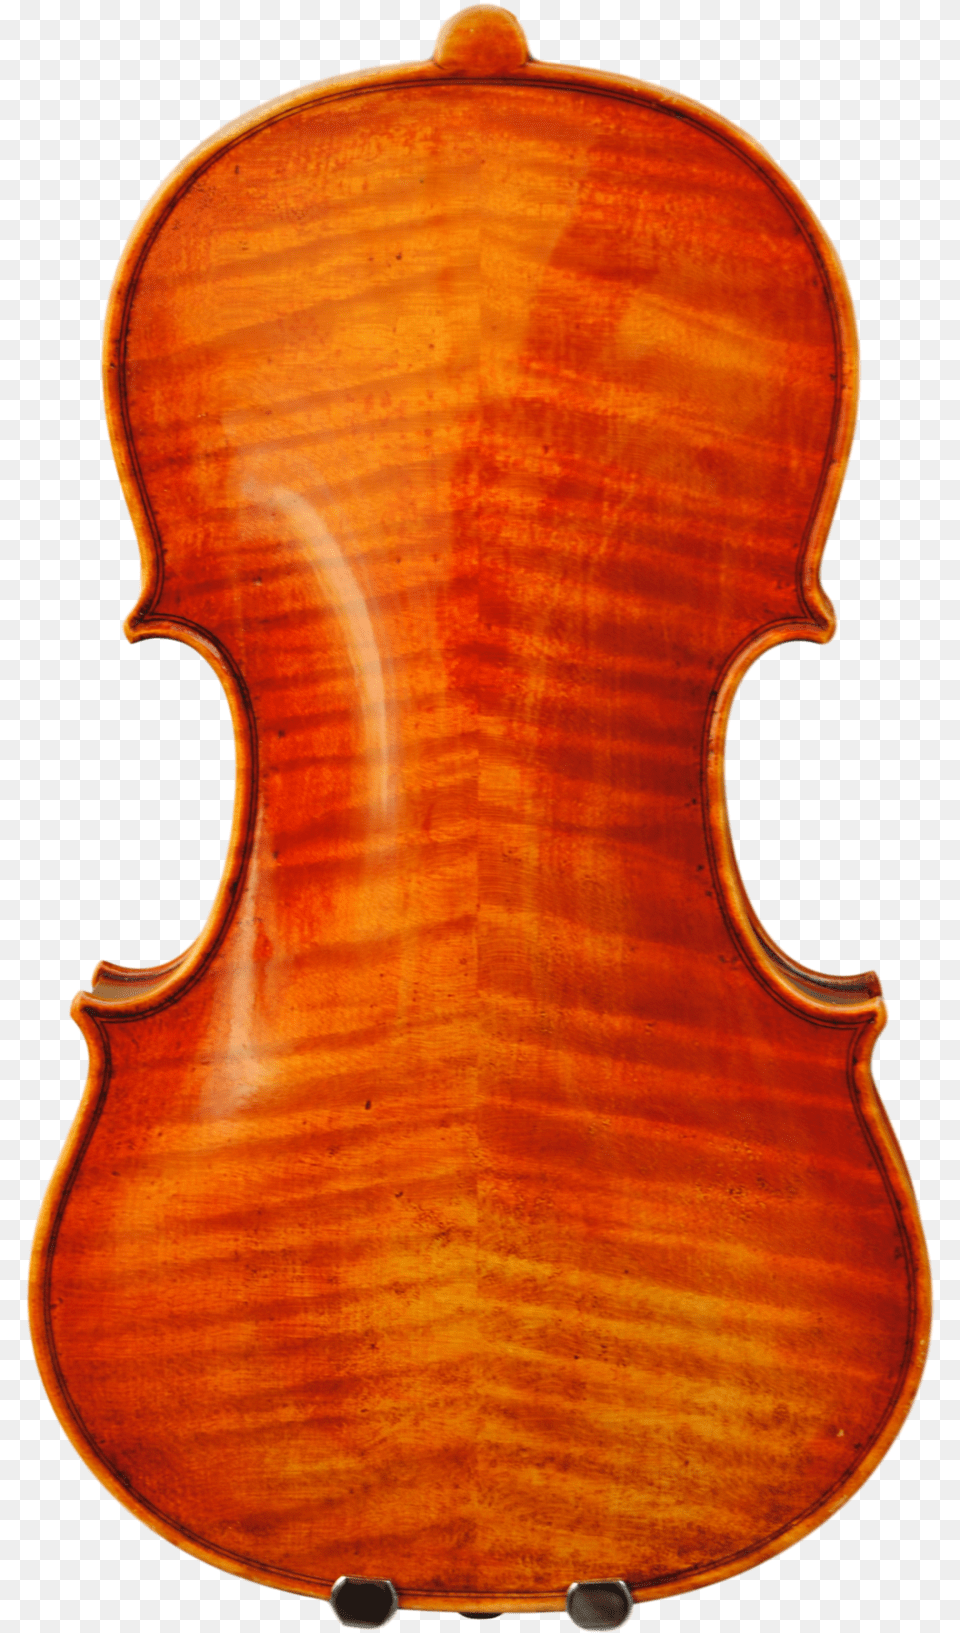 Violin, Cello, Musical Instrument Png